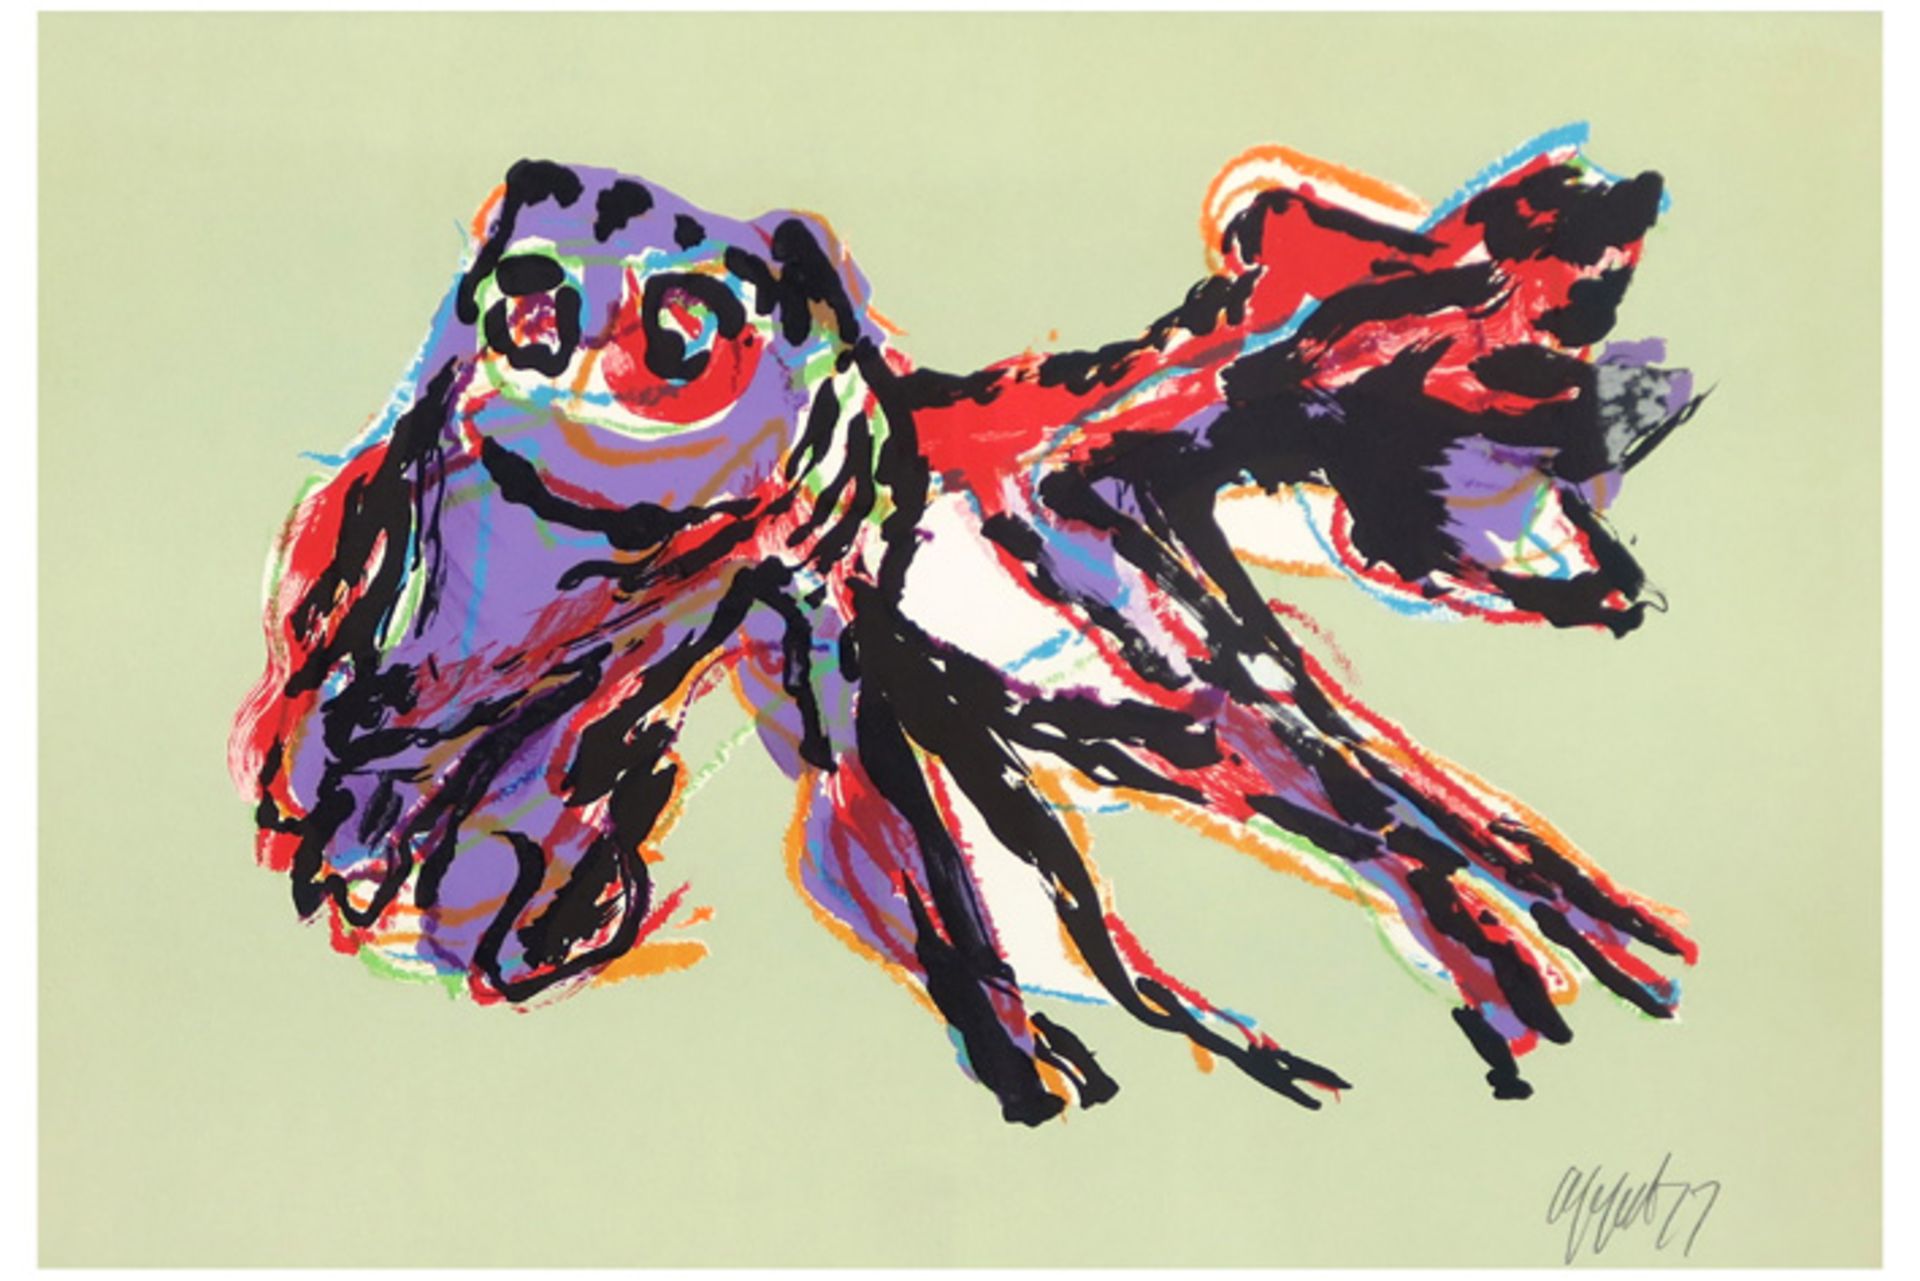 Karel Appel lithograph printed in colors - signed and dated (19)77 || APPEL KAREL (1921 - 2006)